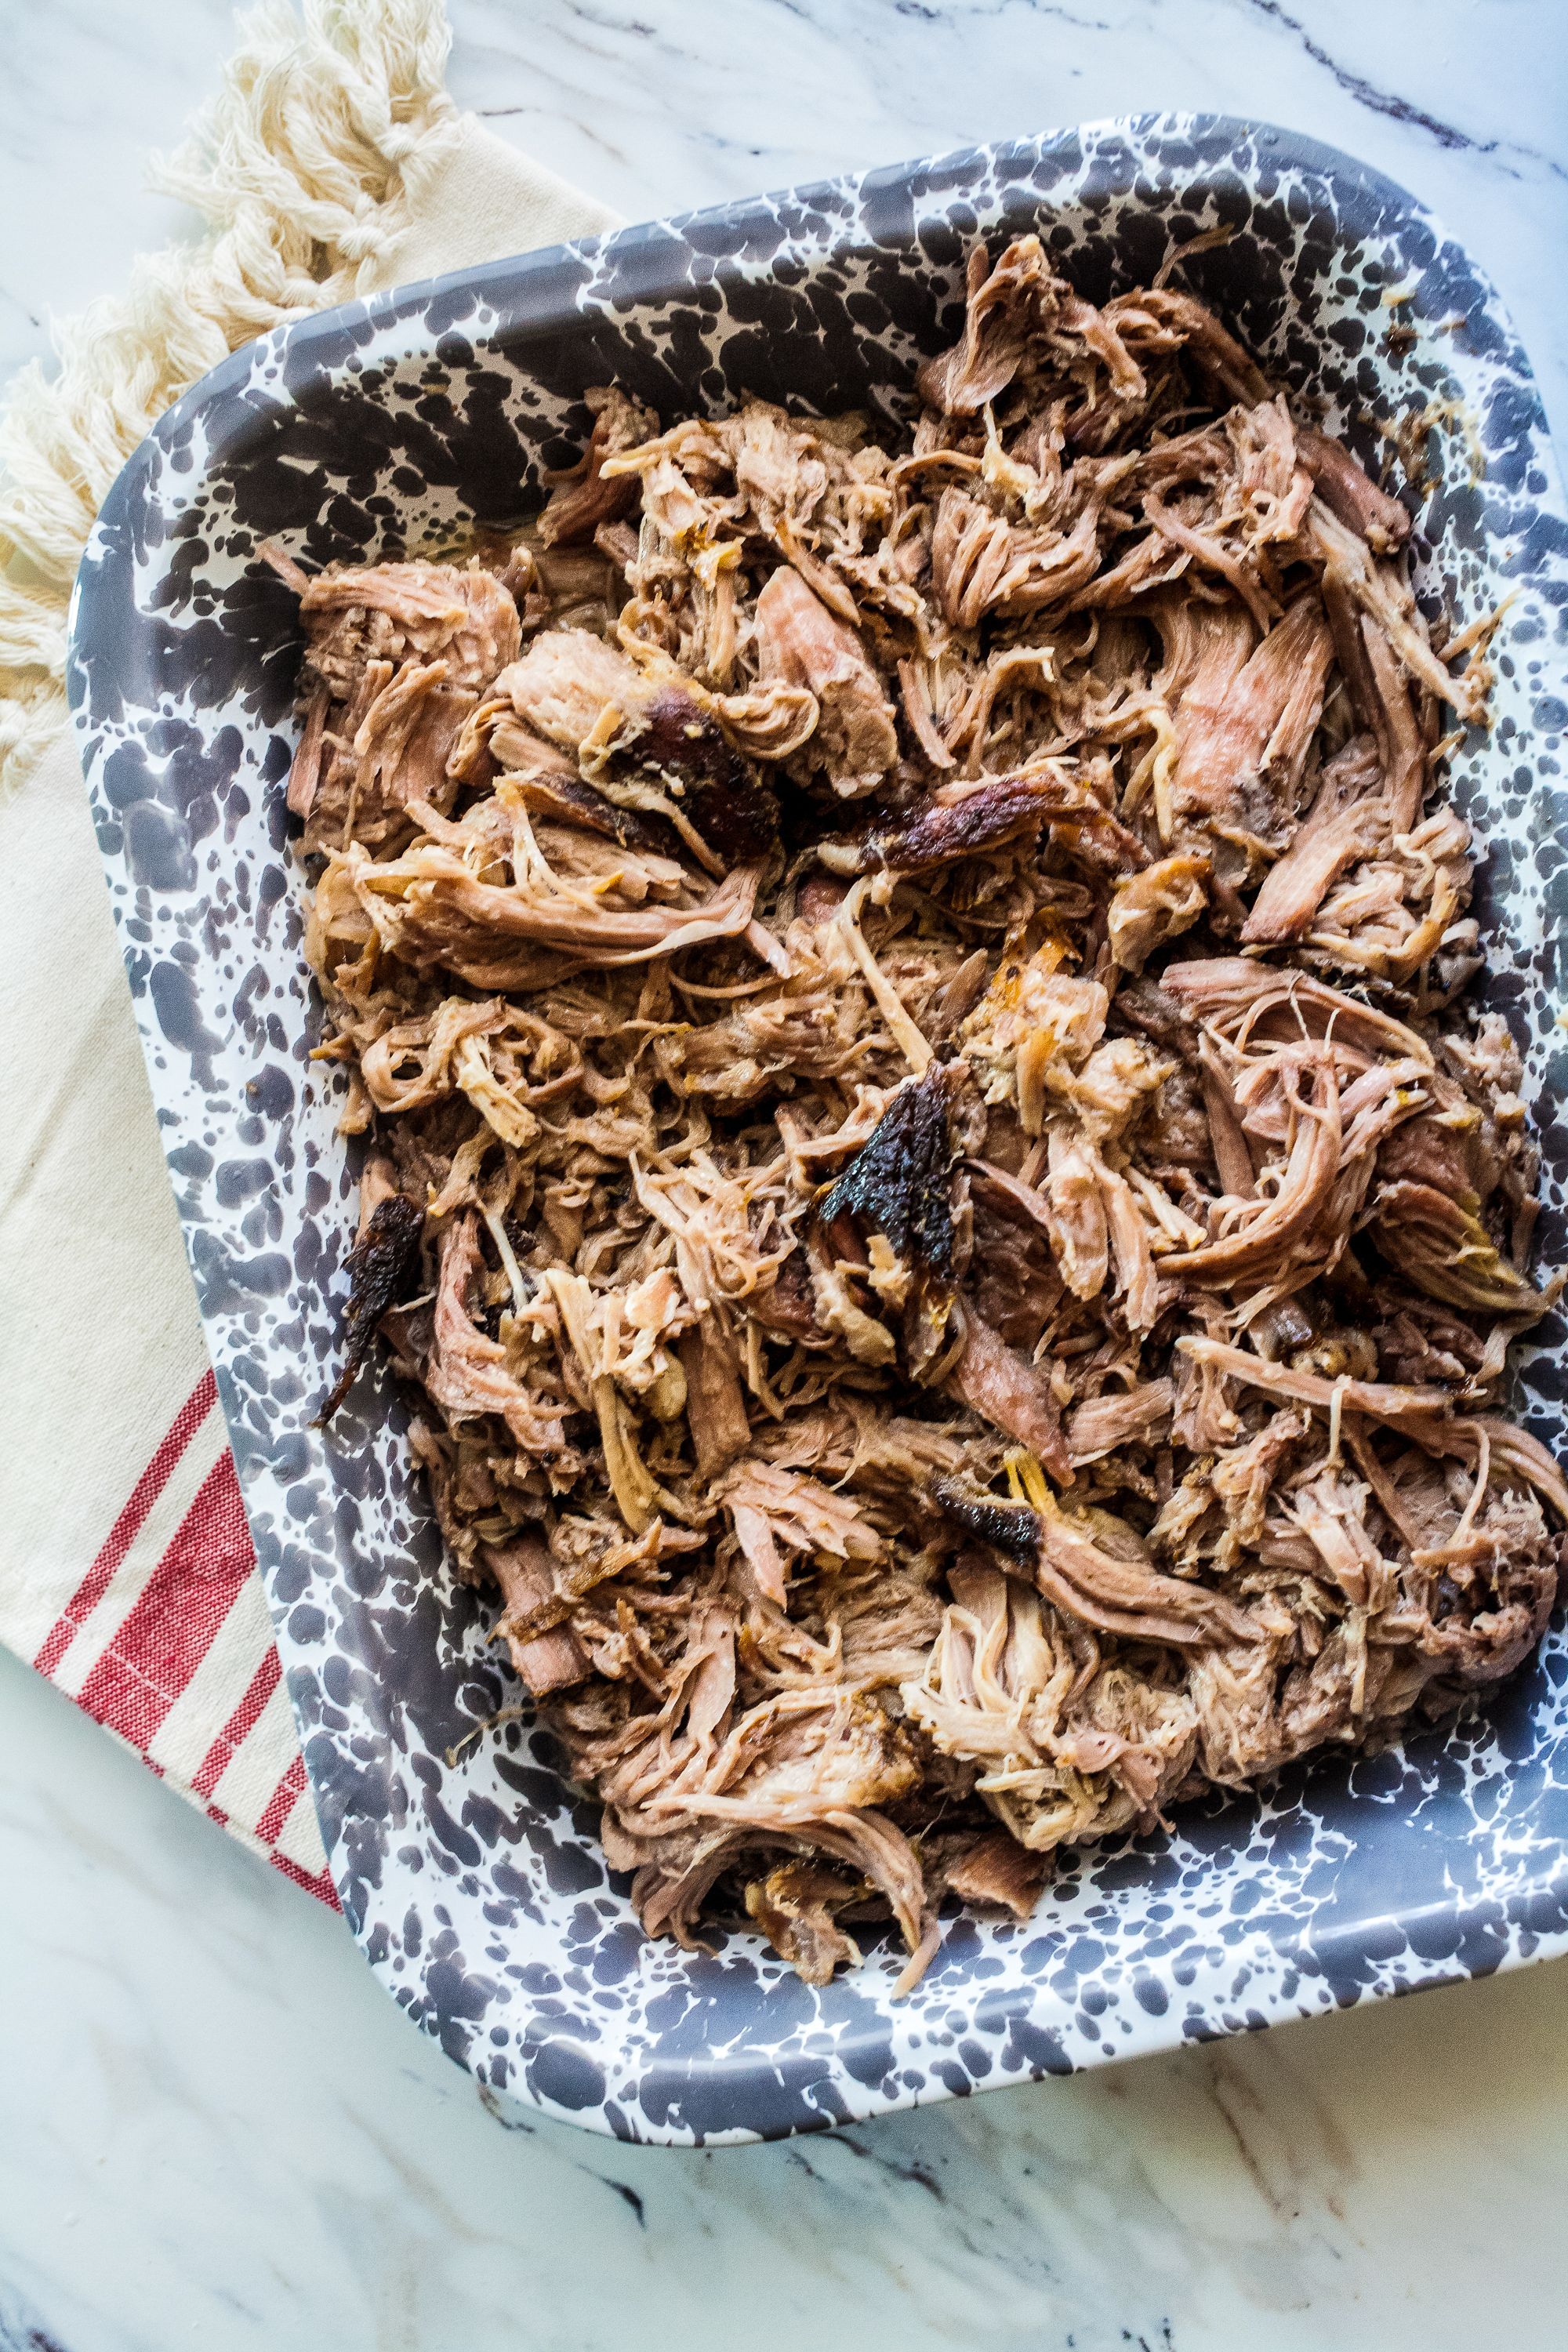 Pioneer Woman Classic Pulled Pork - Adapted for the Crock Pot